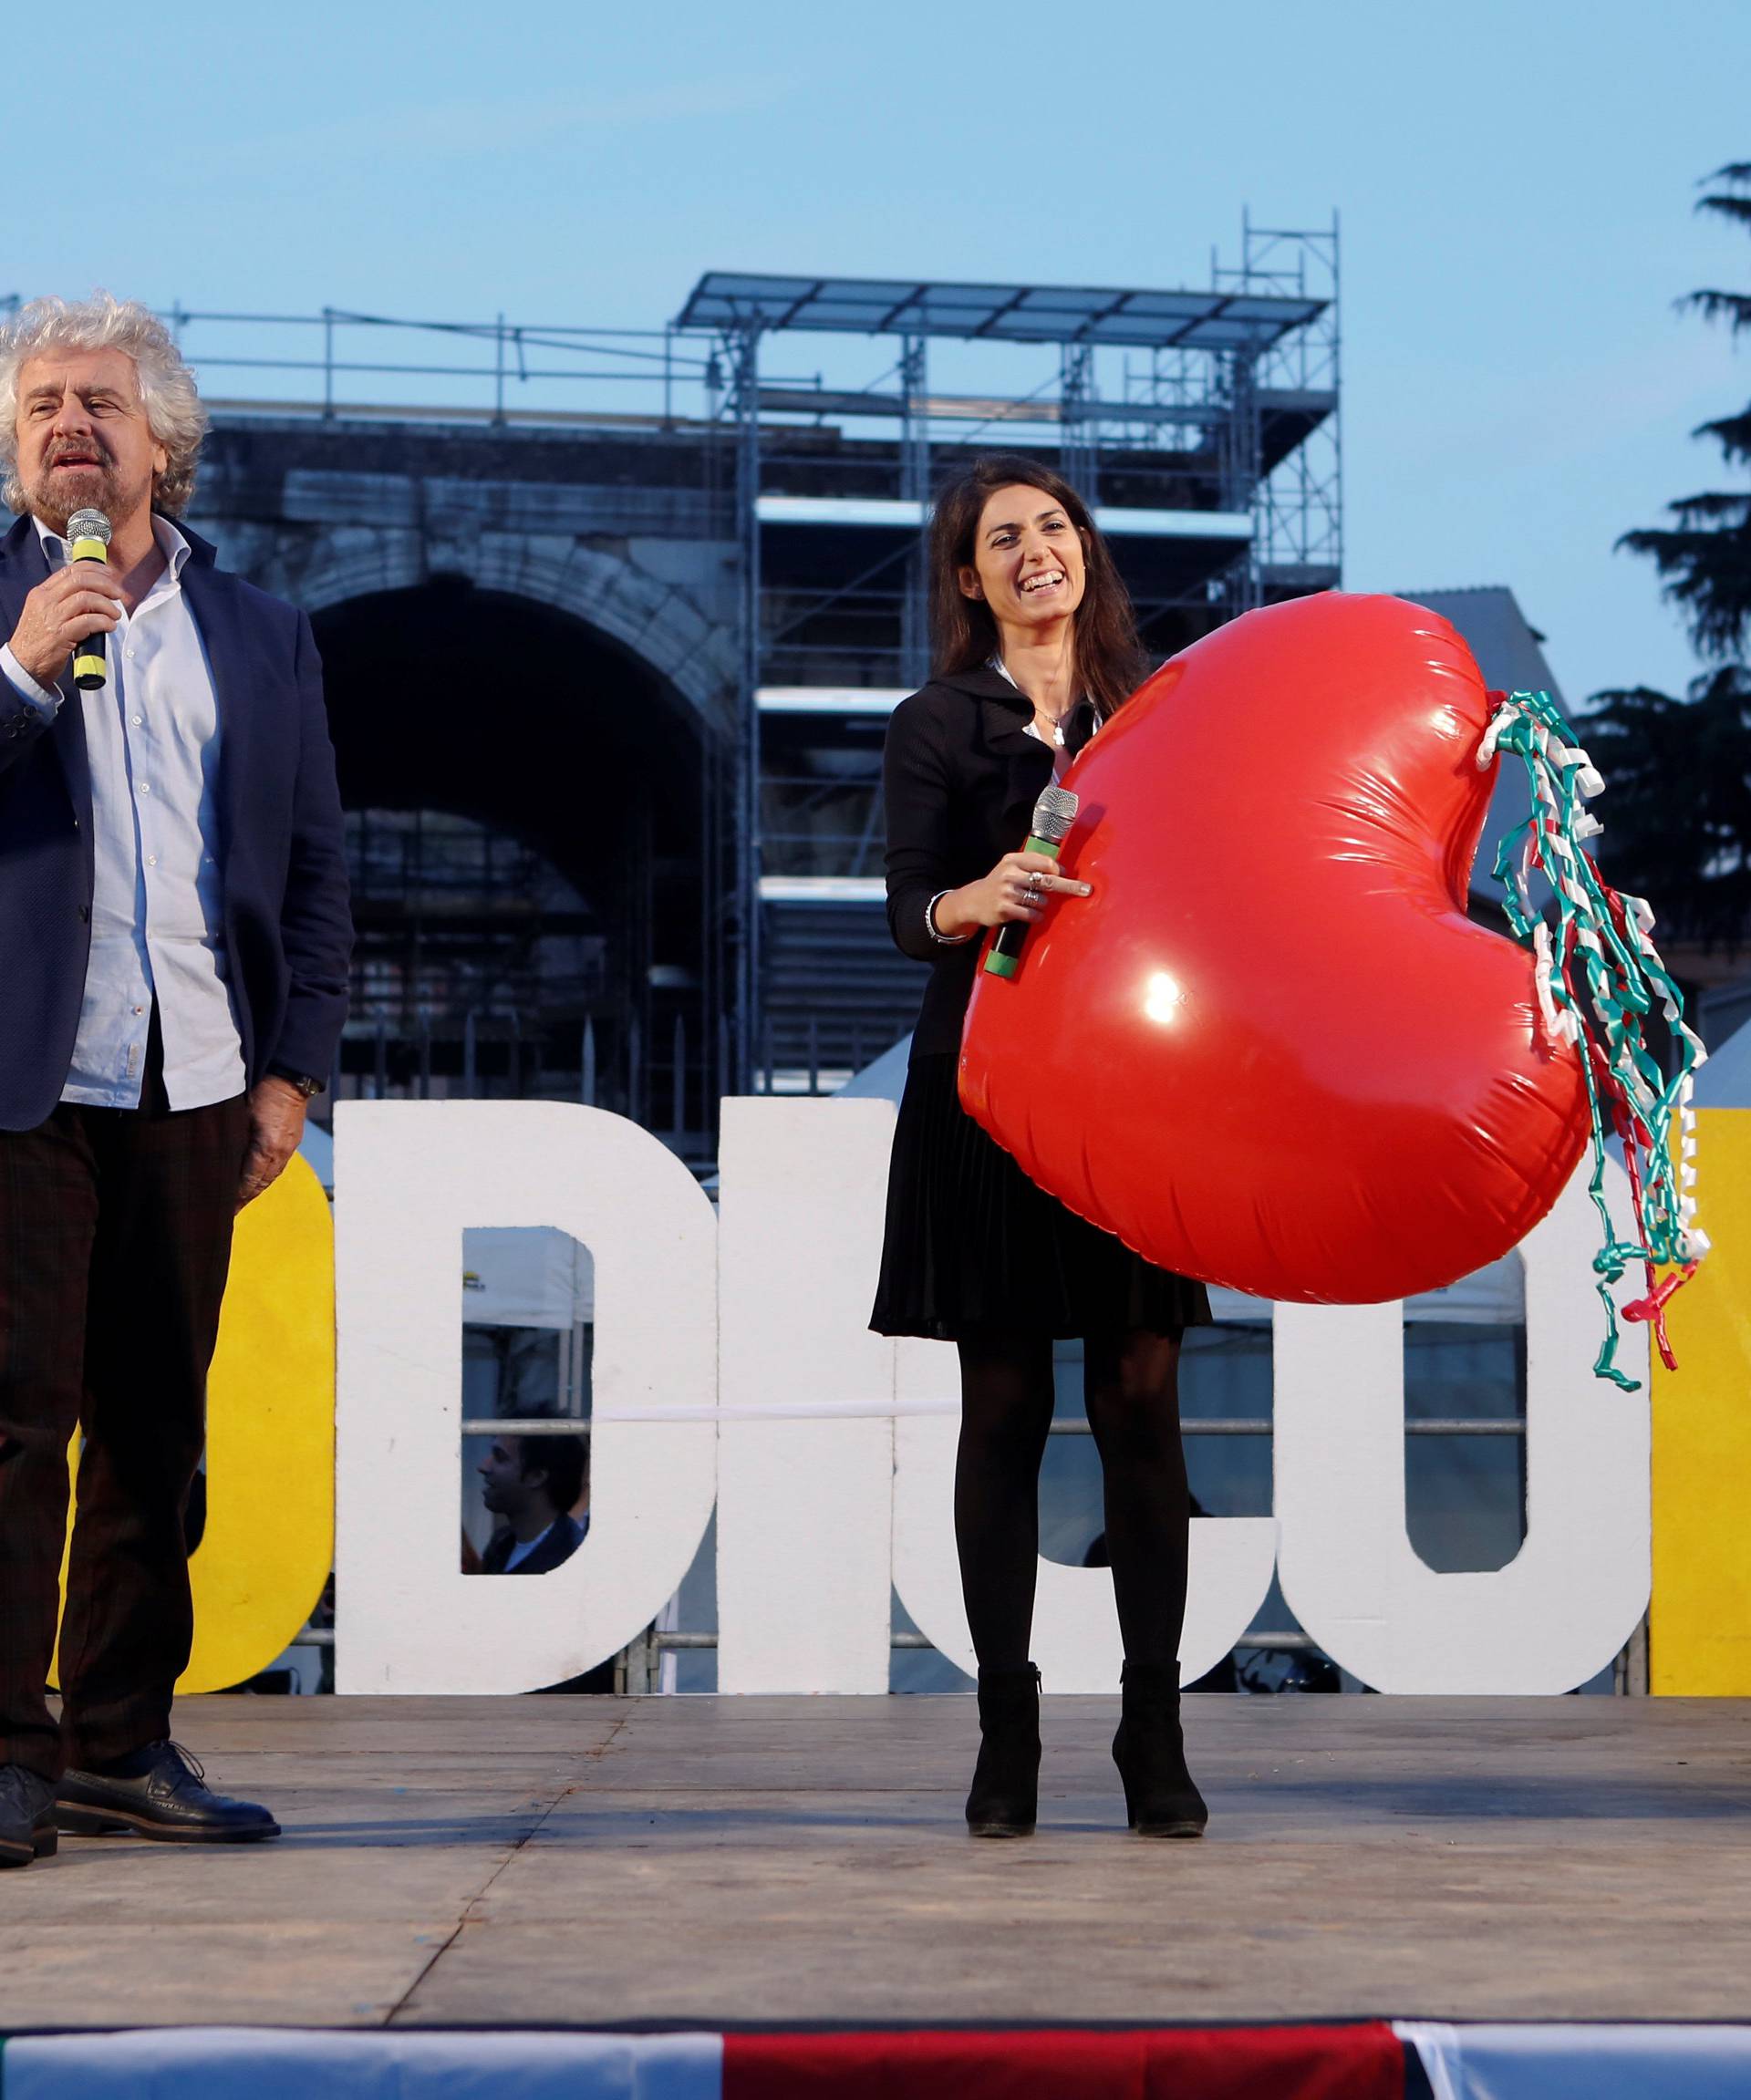 Beppe Grillo, the founder of the anti-establishment 5-Star Movement, stands next to with Rome's Mayor Virginia Raggi during a march in support of the 'No' vote in the upcoming constitutional reform referendum in Rome